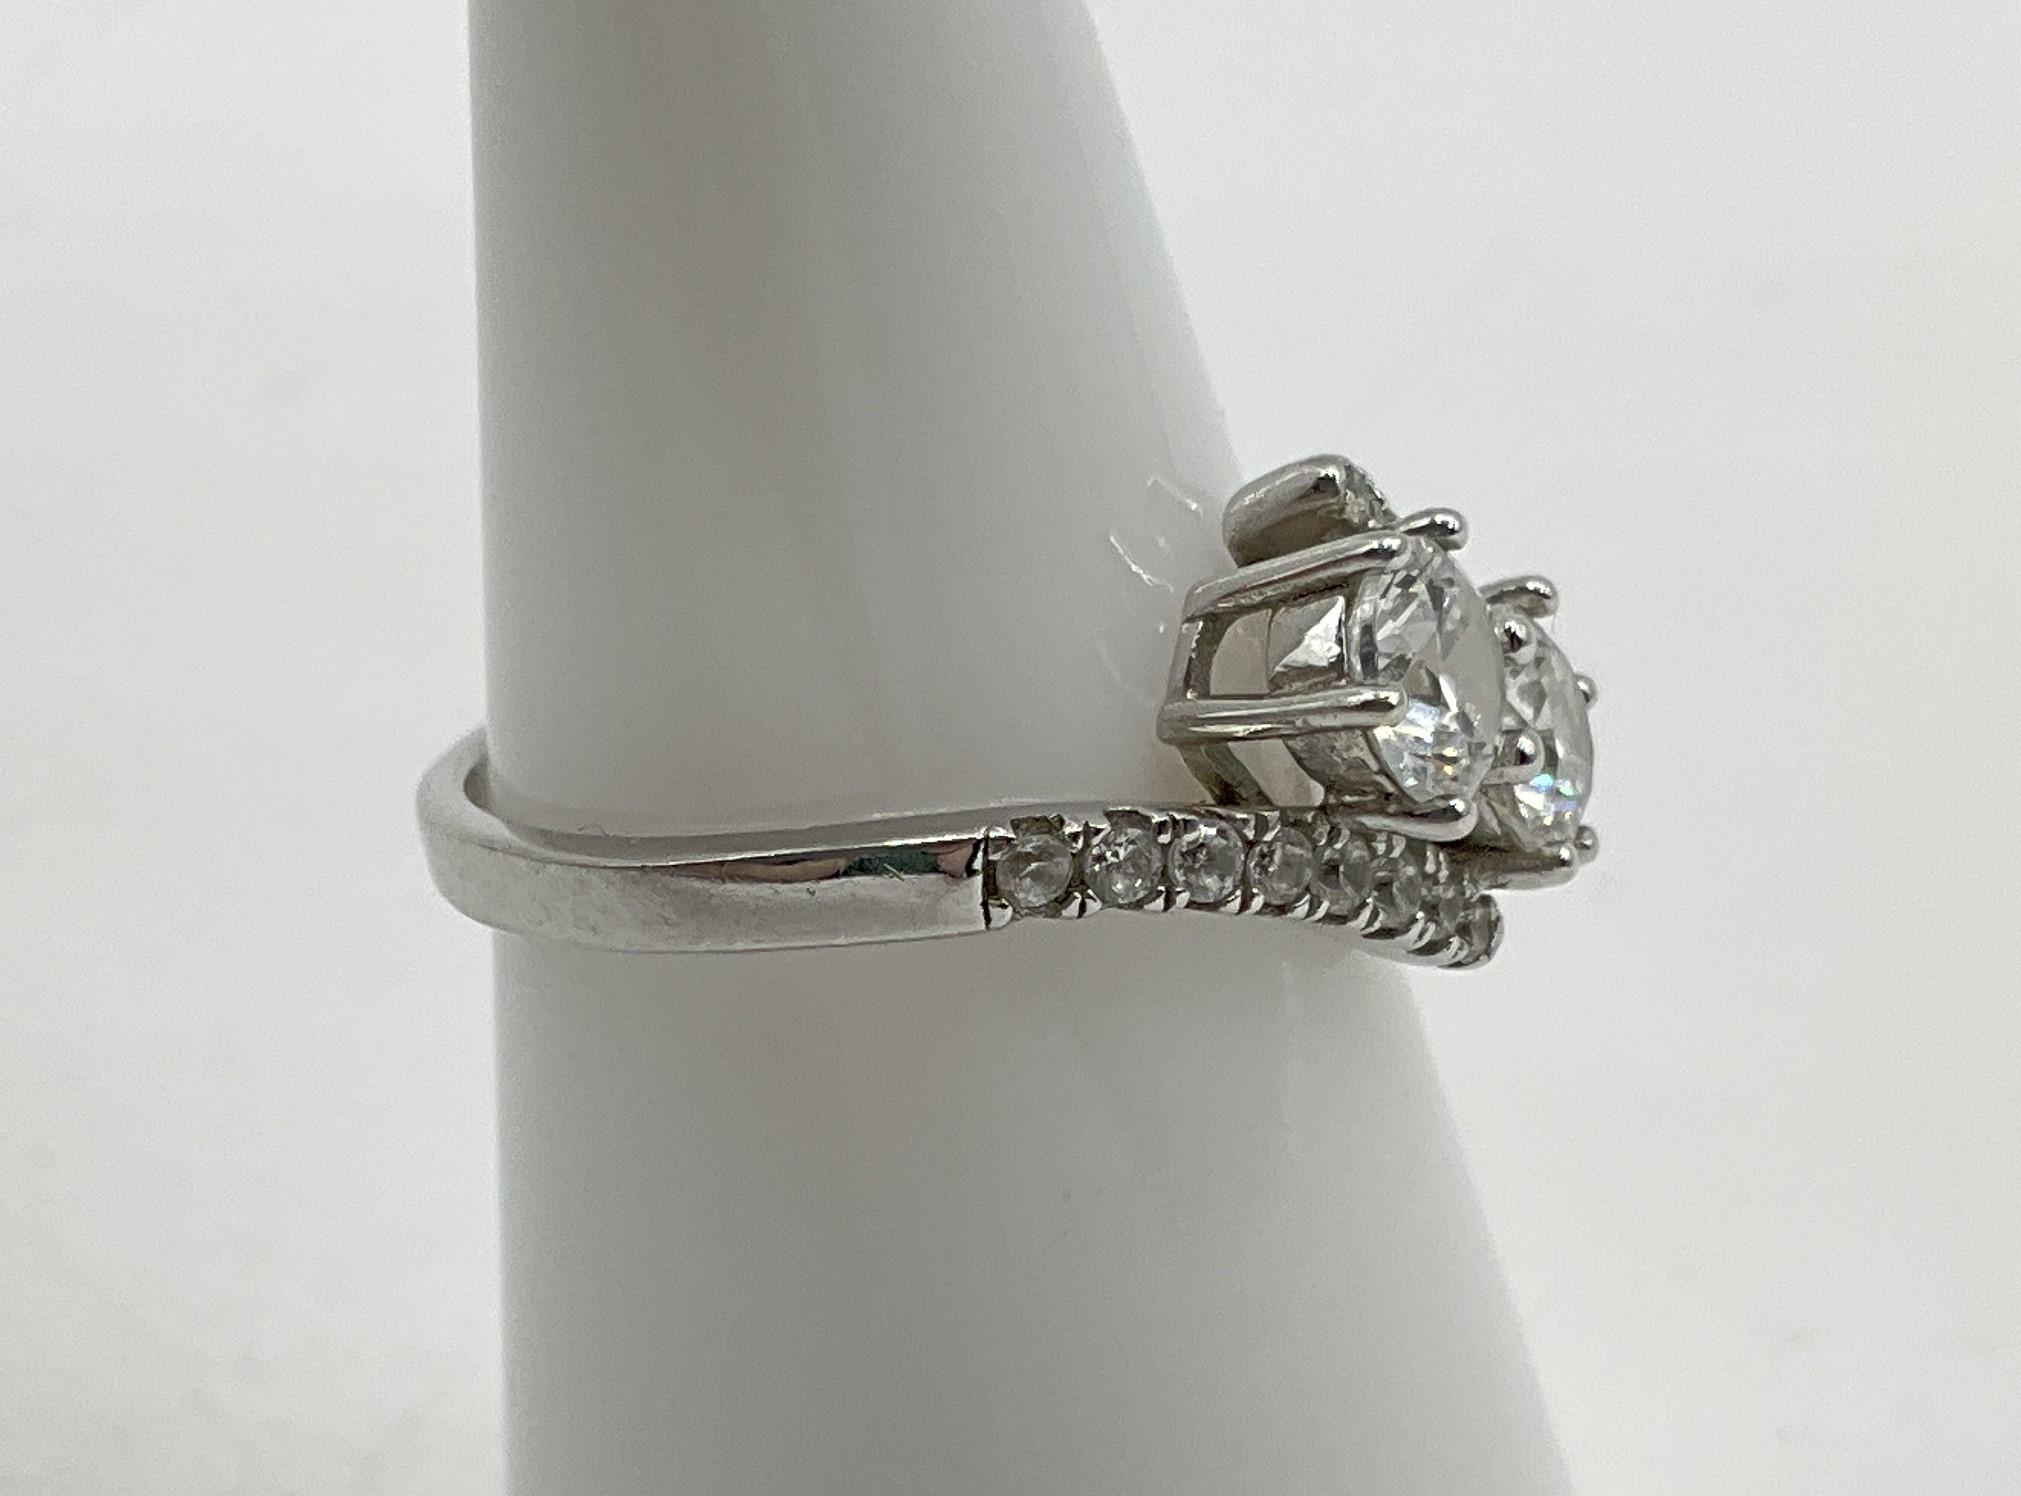 2.7g .925 Sterling Ring Size 6